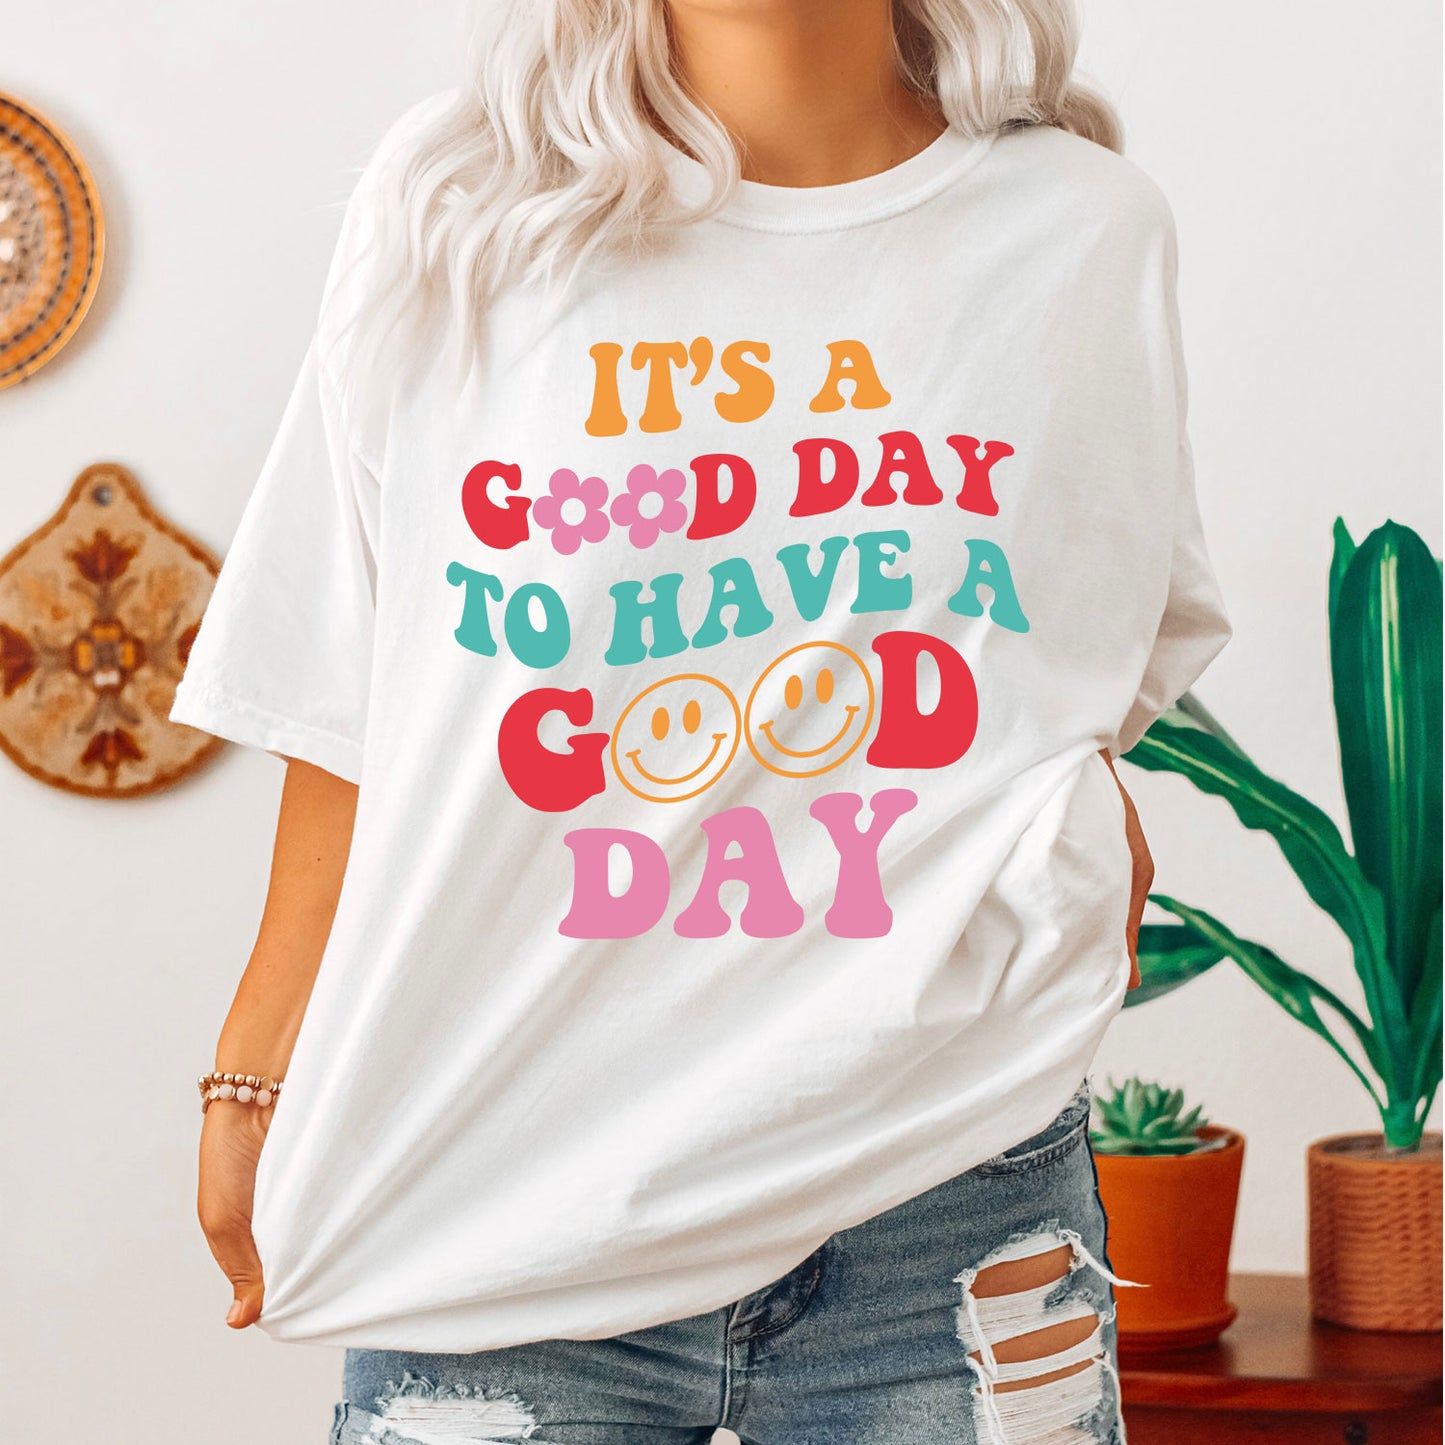 Today Is A Good Day - Front & Back Set - Screen Print Transfer